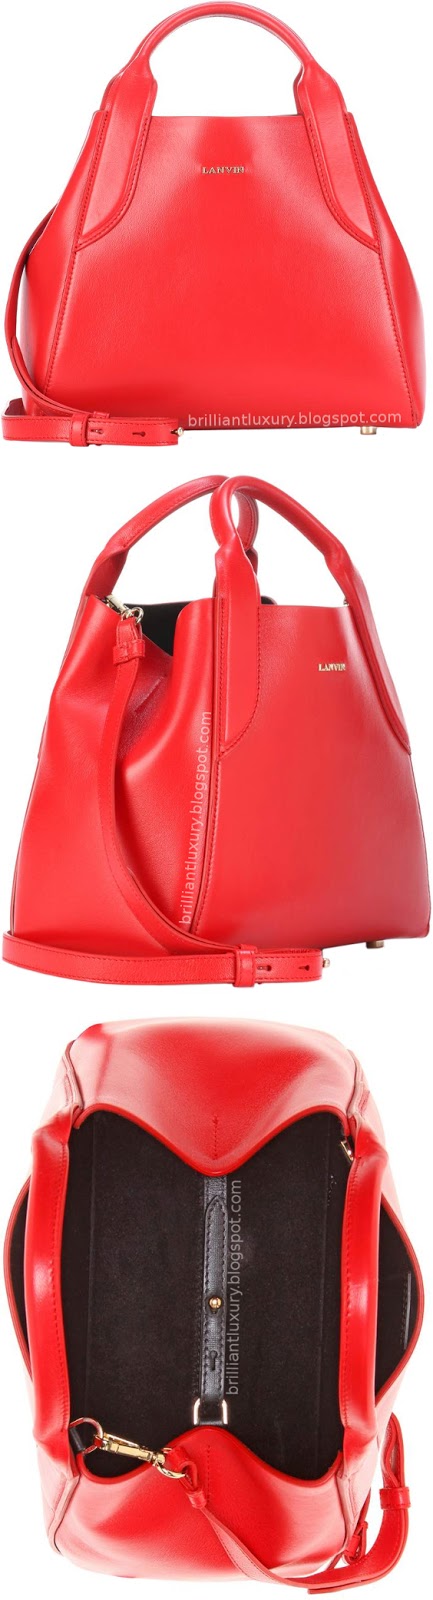 Brilliant Luxury ♦ Lanvin small red cabas leather tote bag